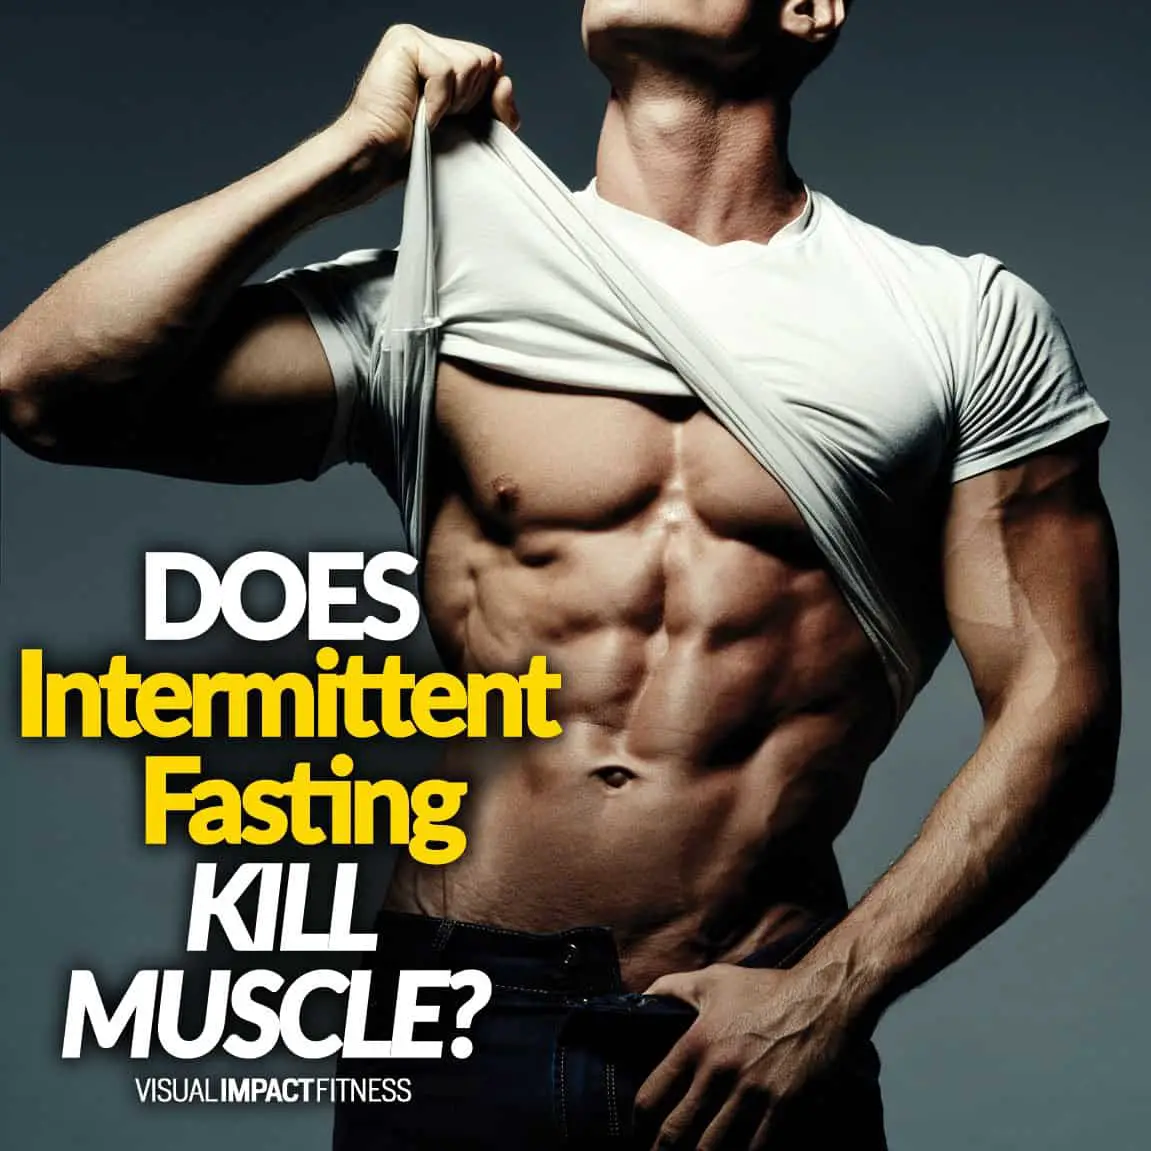 Does Intermittent Fasting KILL MUSCLE?